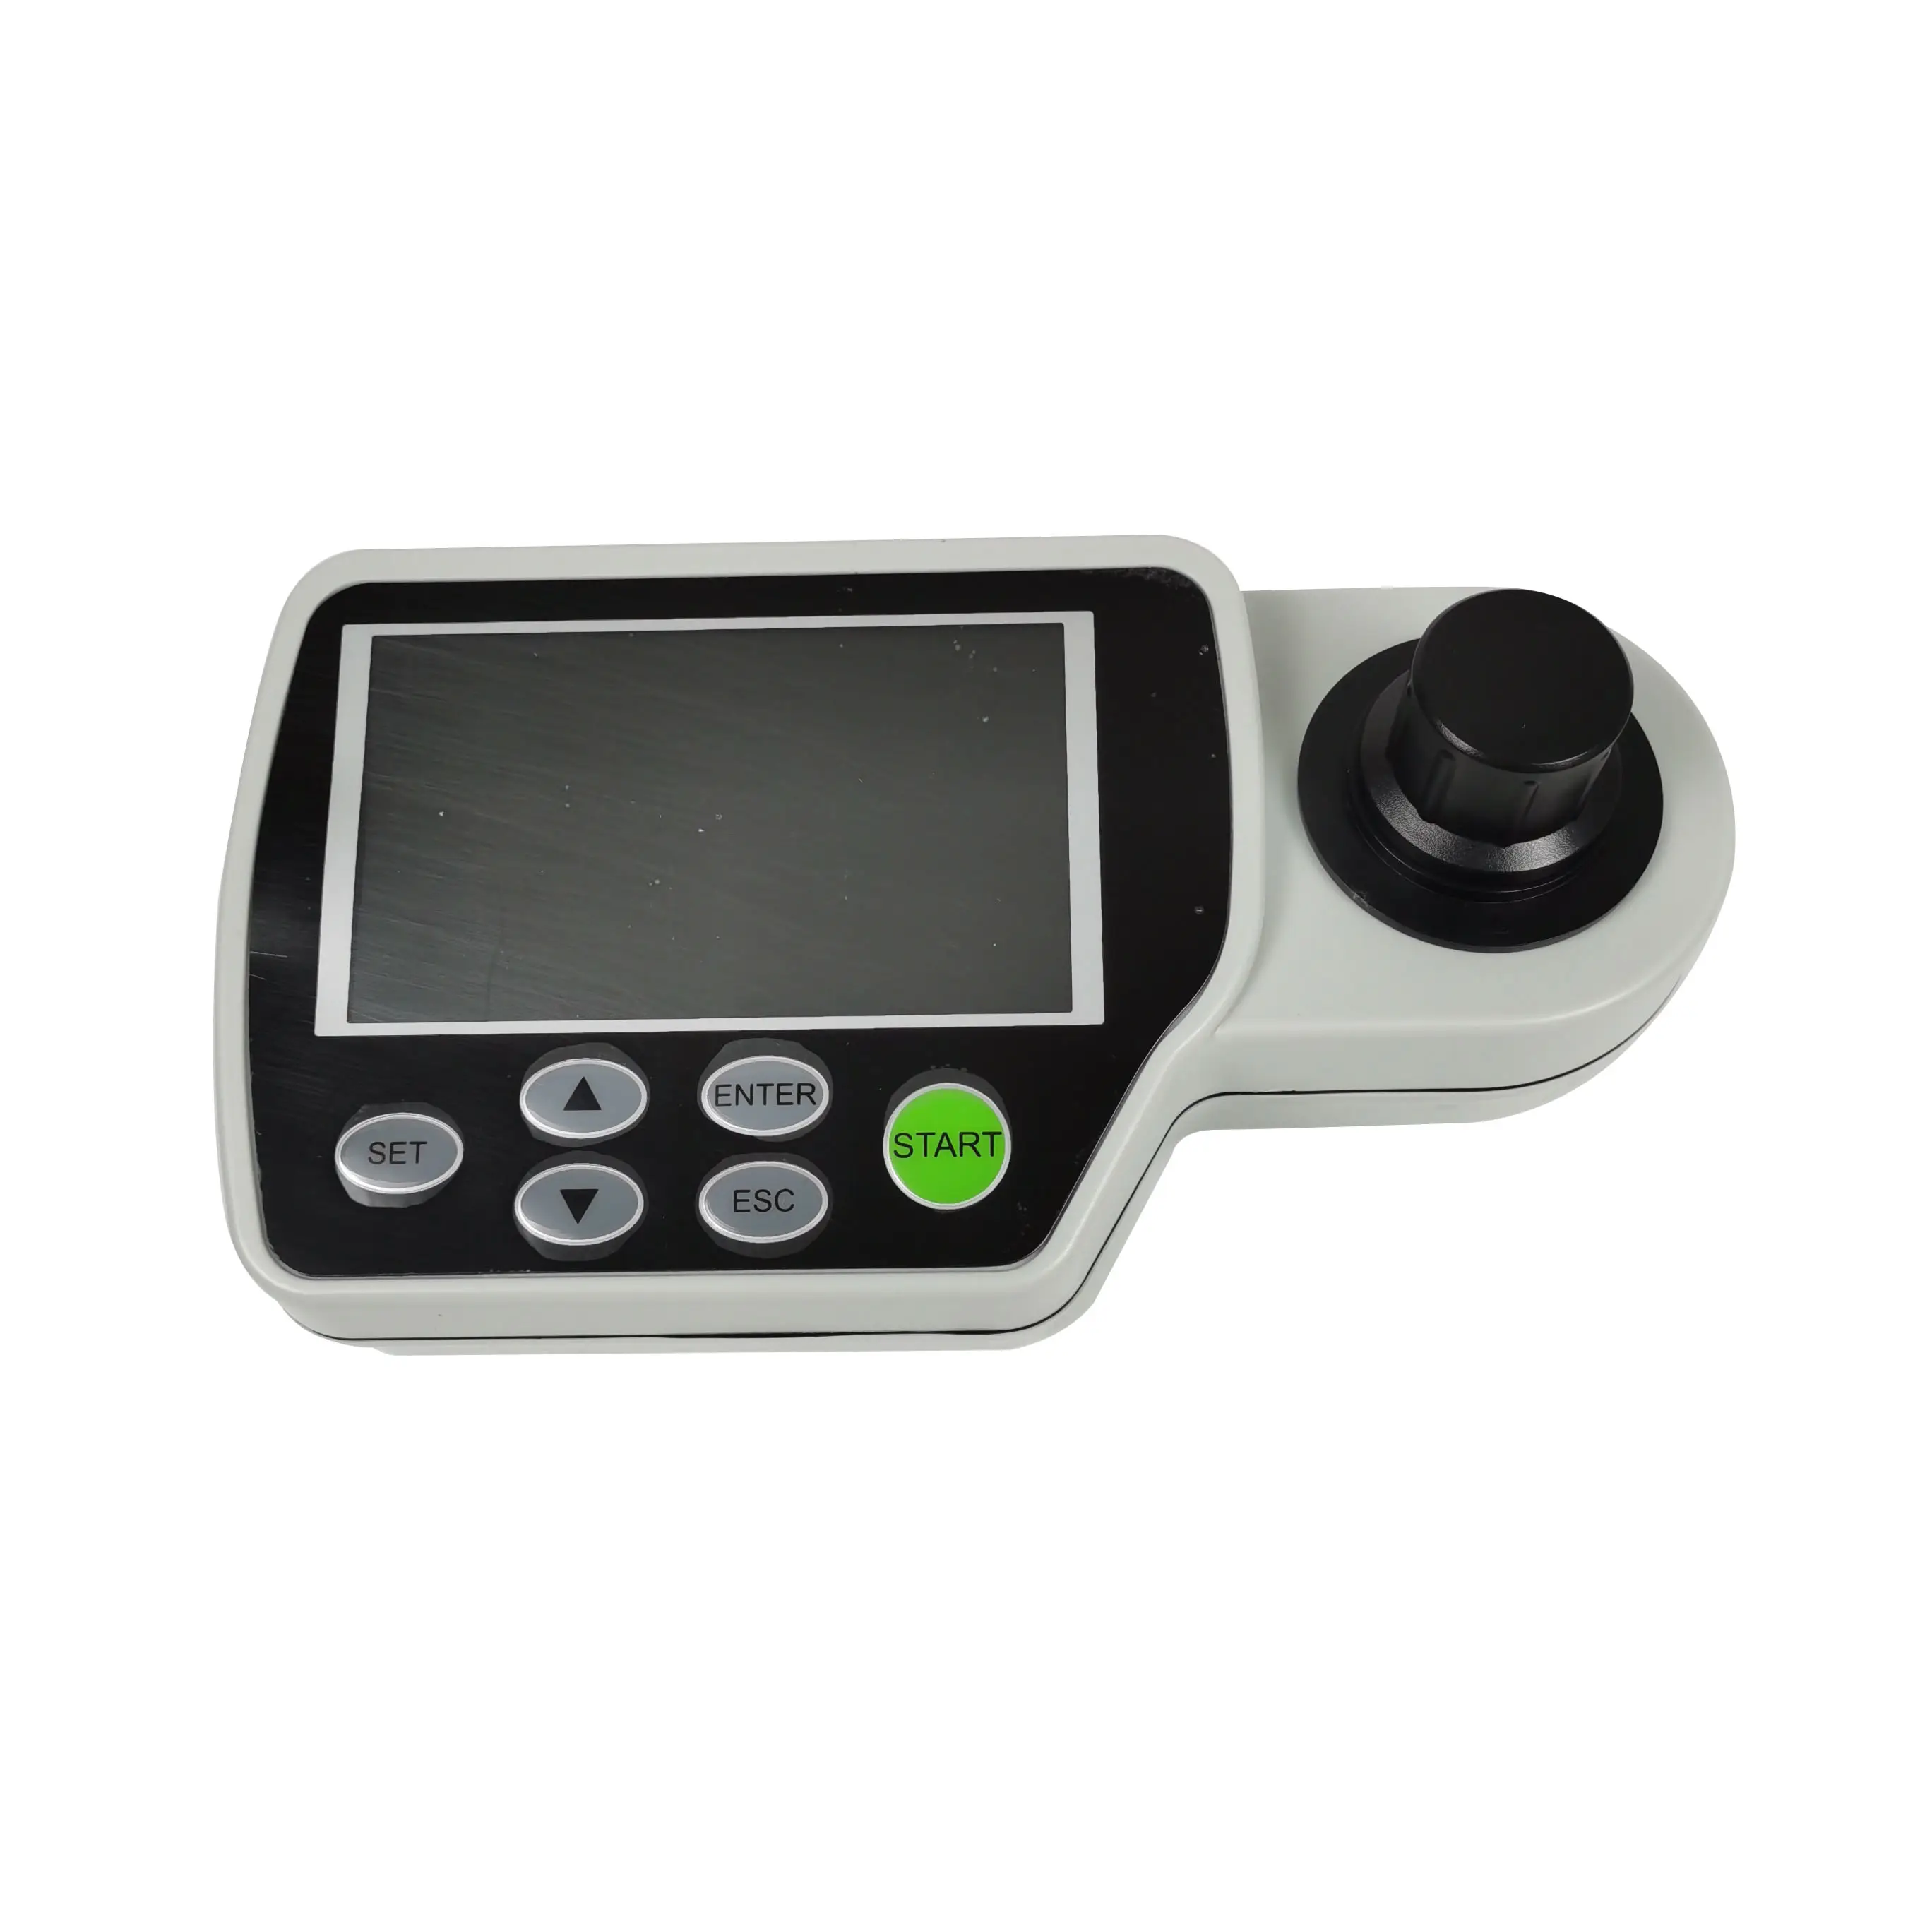 PEAK 4.3 Inch Color LCD Screen Portable Smart Turbidity Meter with LED Light Source